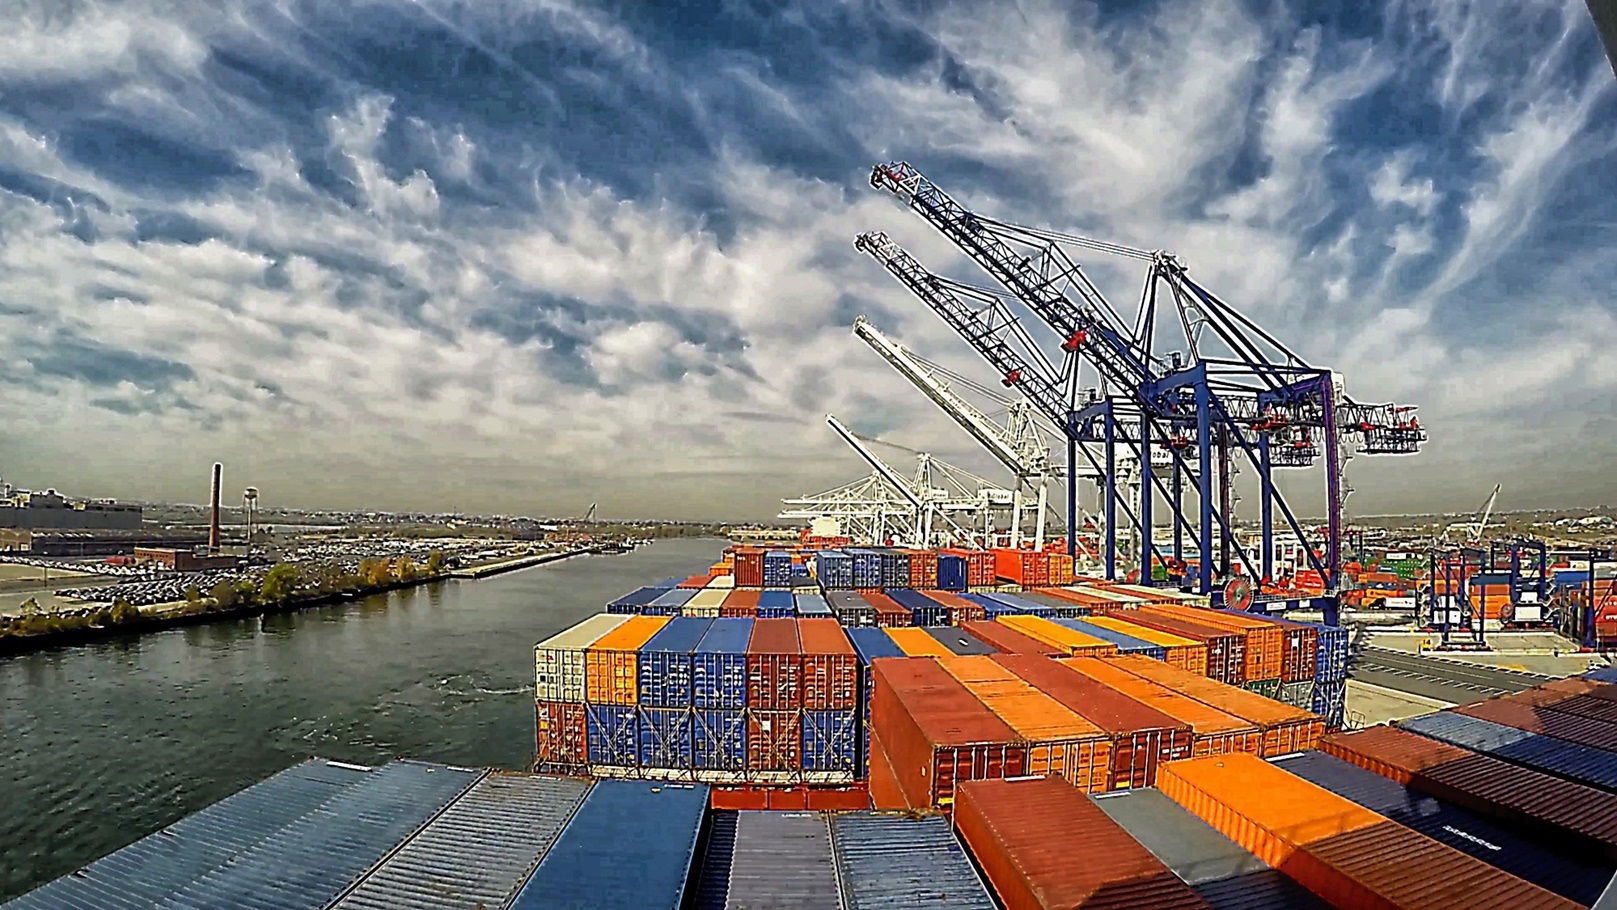 containers-on-cranes-in-export-terminal-port-2022-03-21-12-37-56-utc